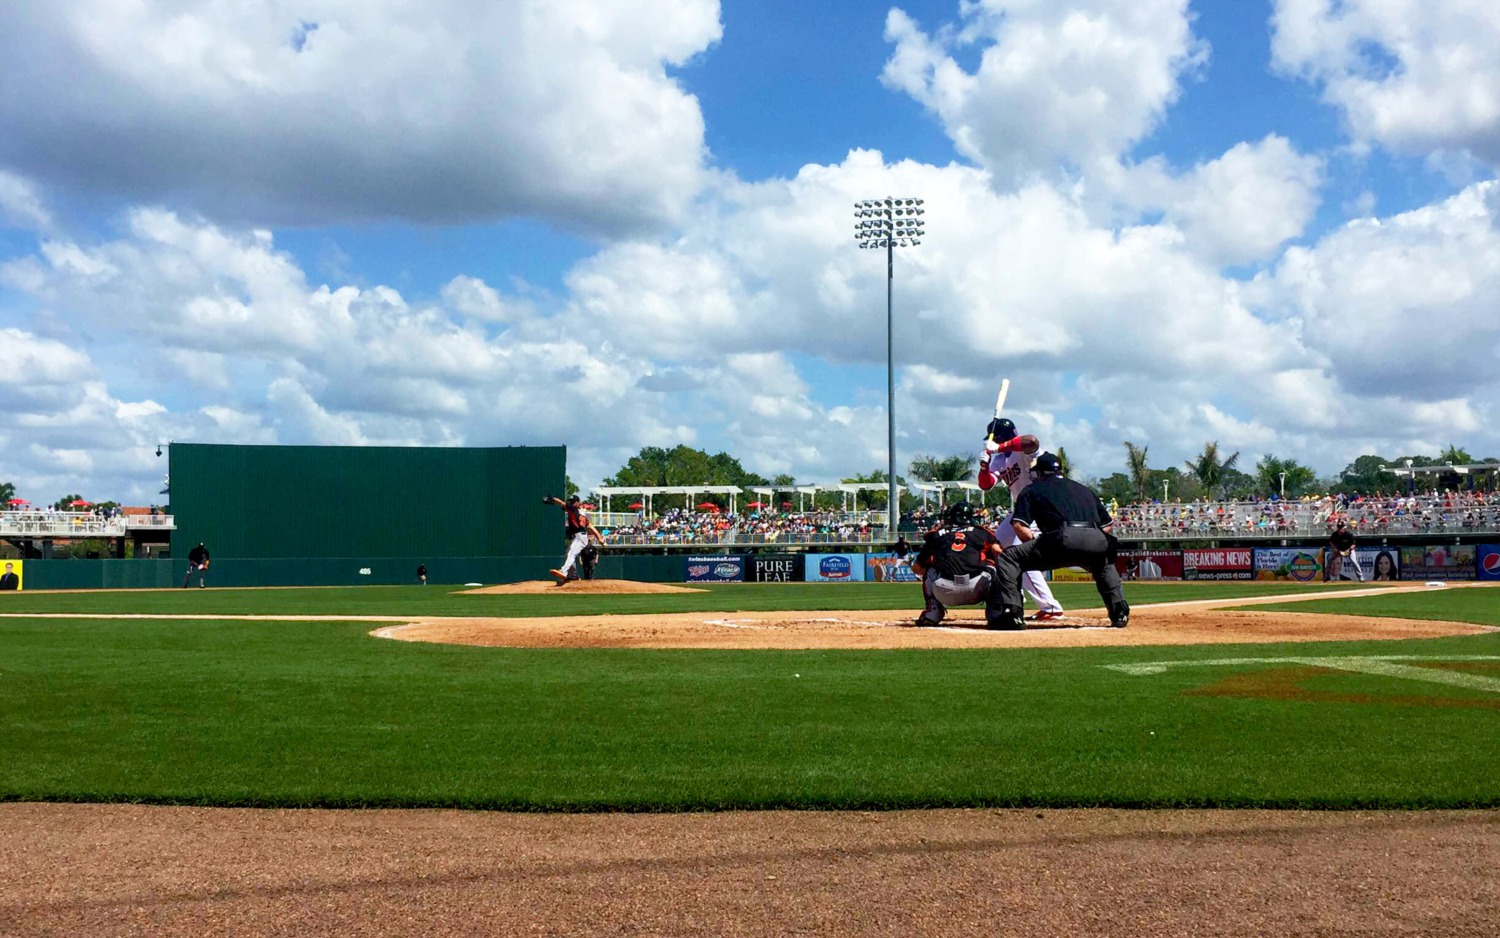 Spring Training in Fort Myers